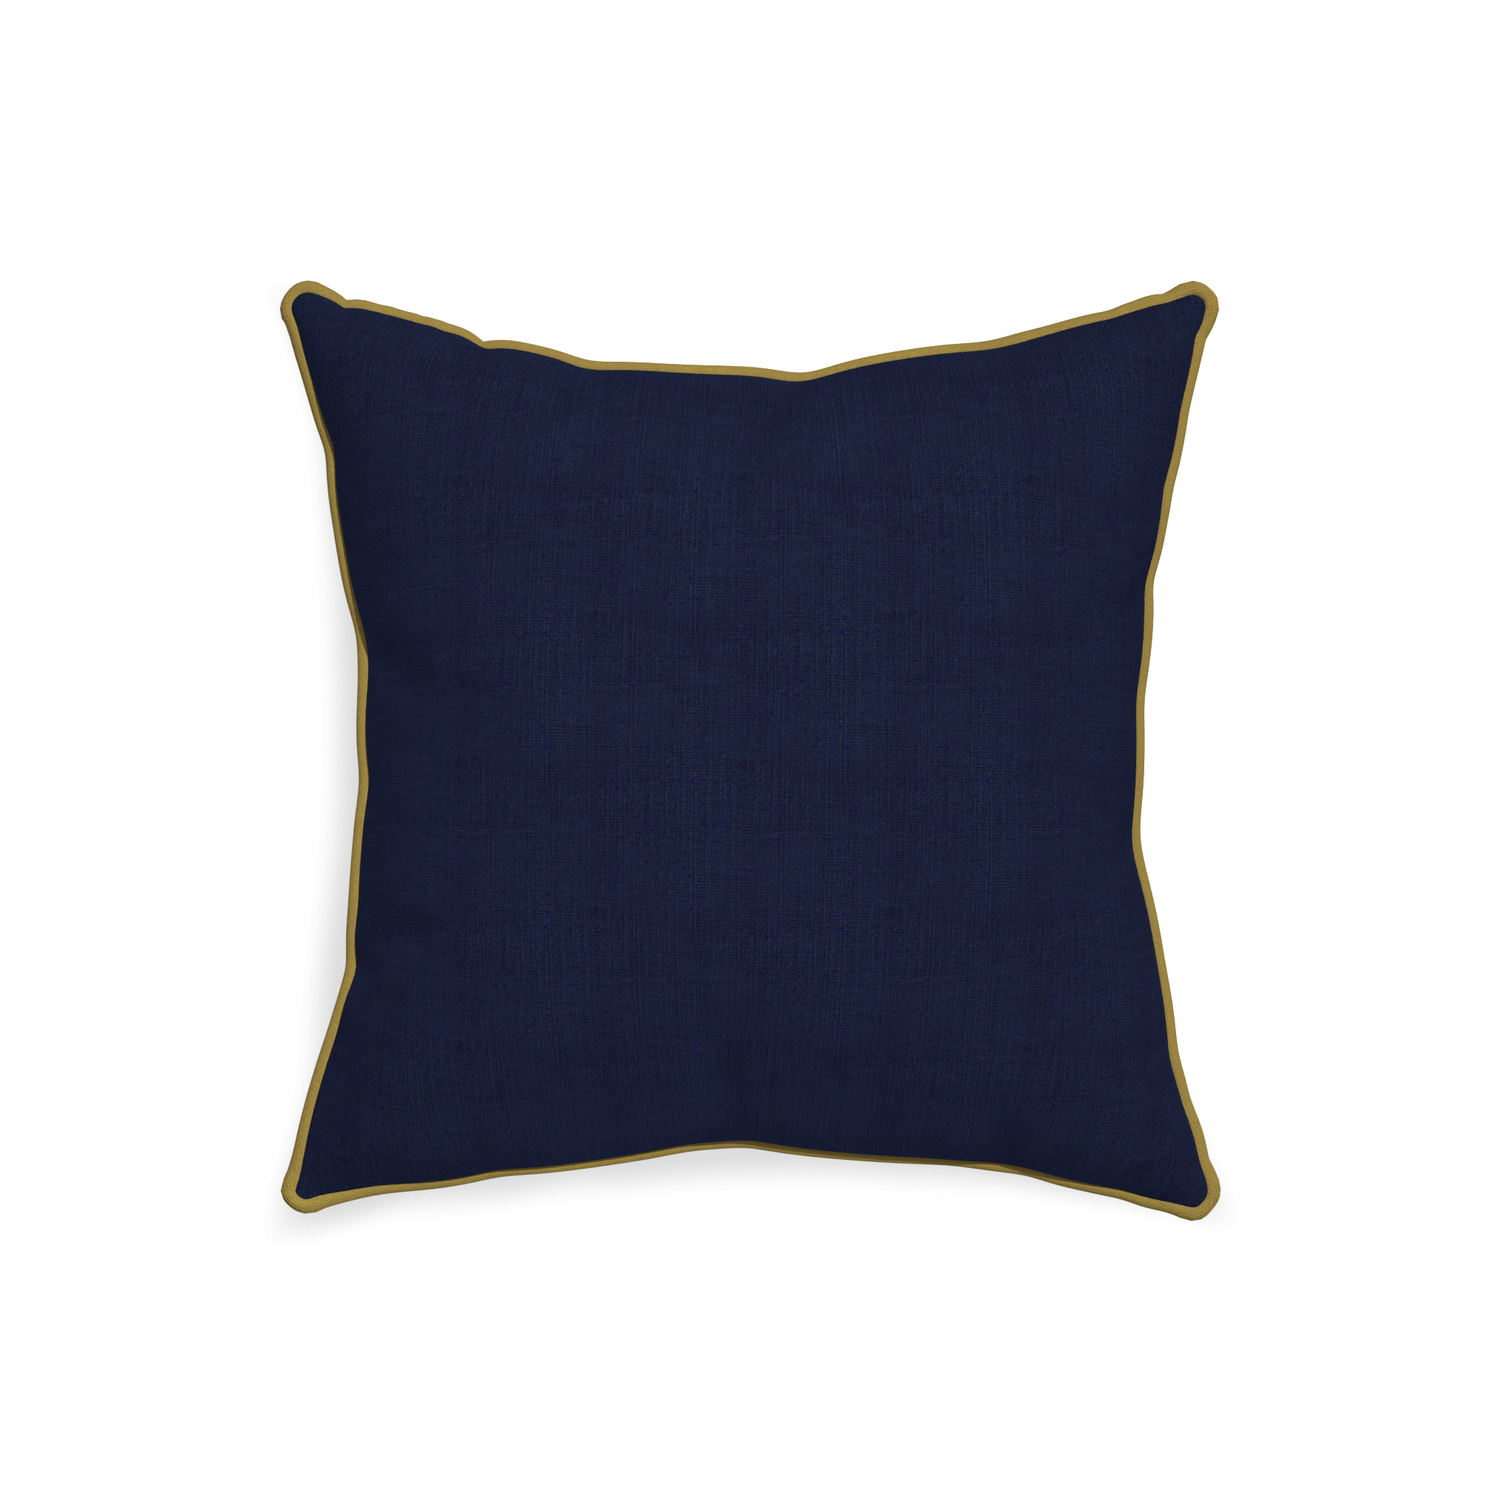 20-square midnight custom navy bluepillow with c piping on white background